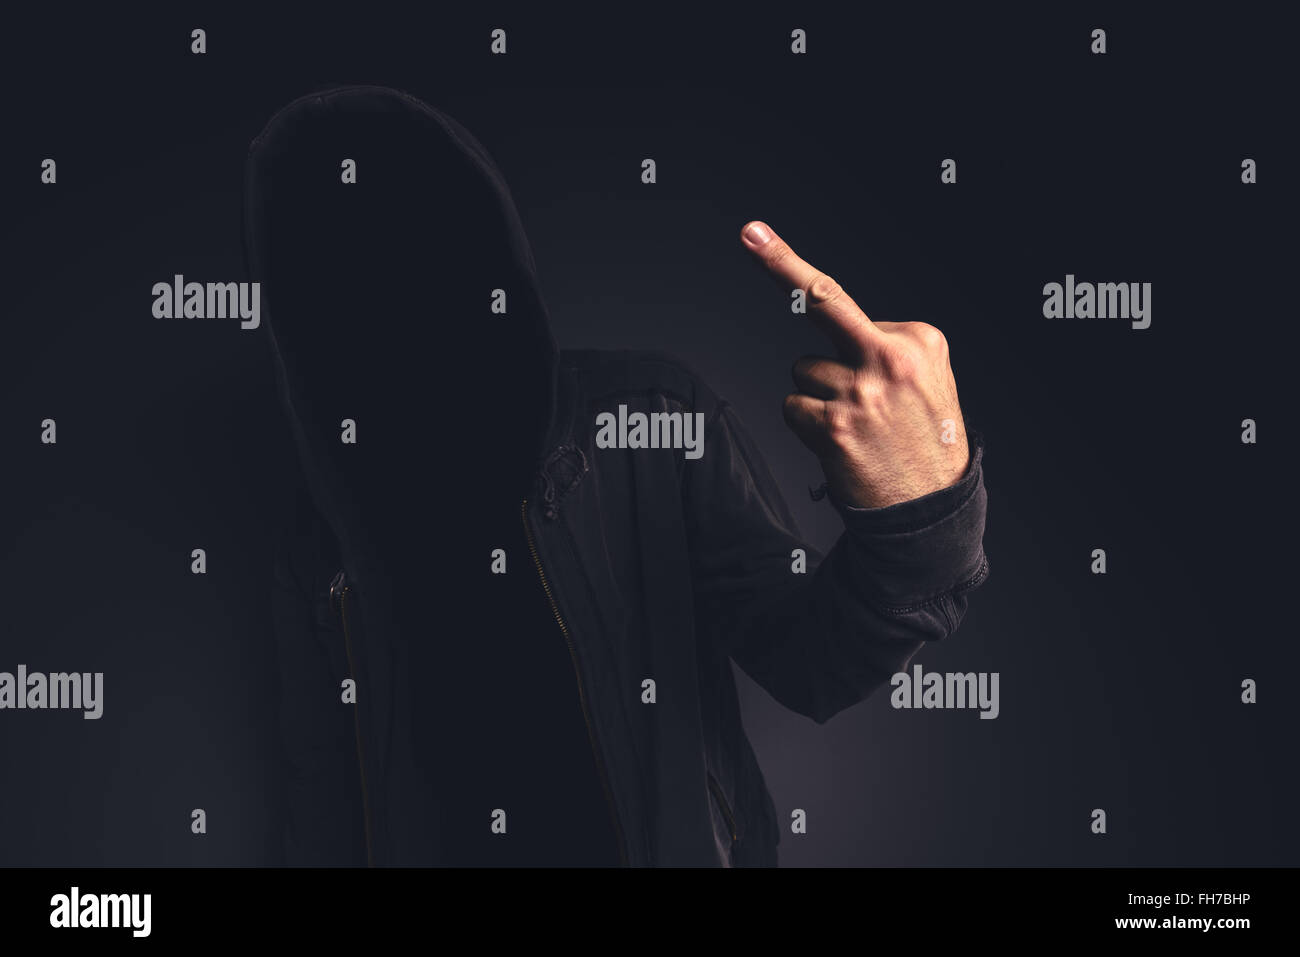 Middle finger offensive hand gesture given by unrecognizable hooded person. Stock Photo